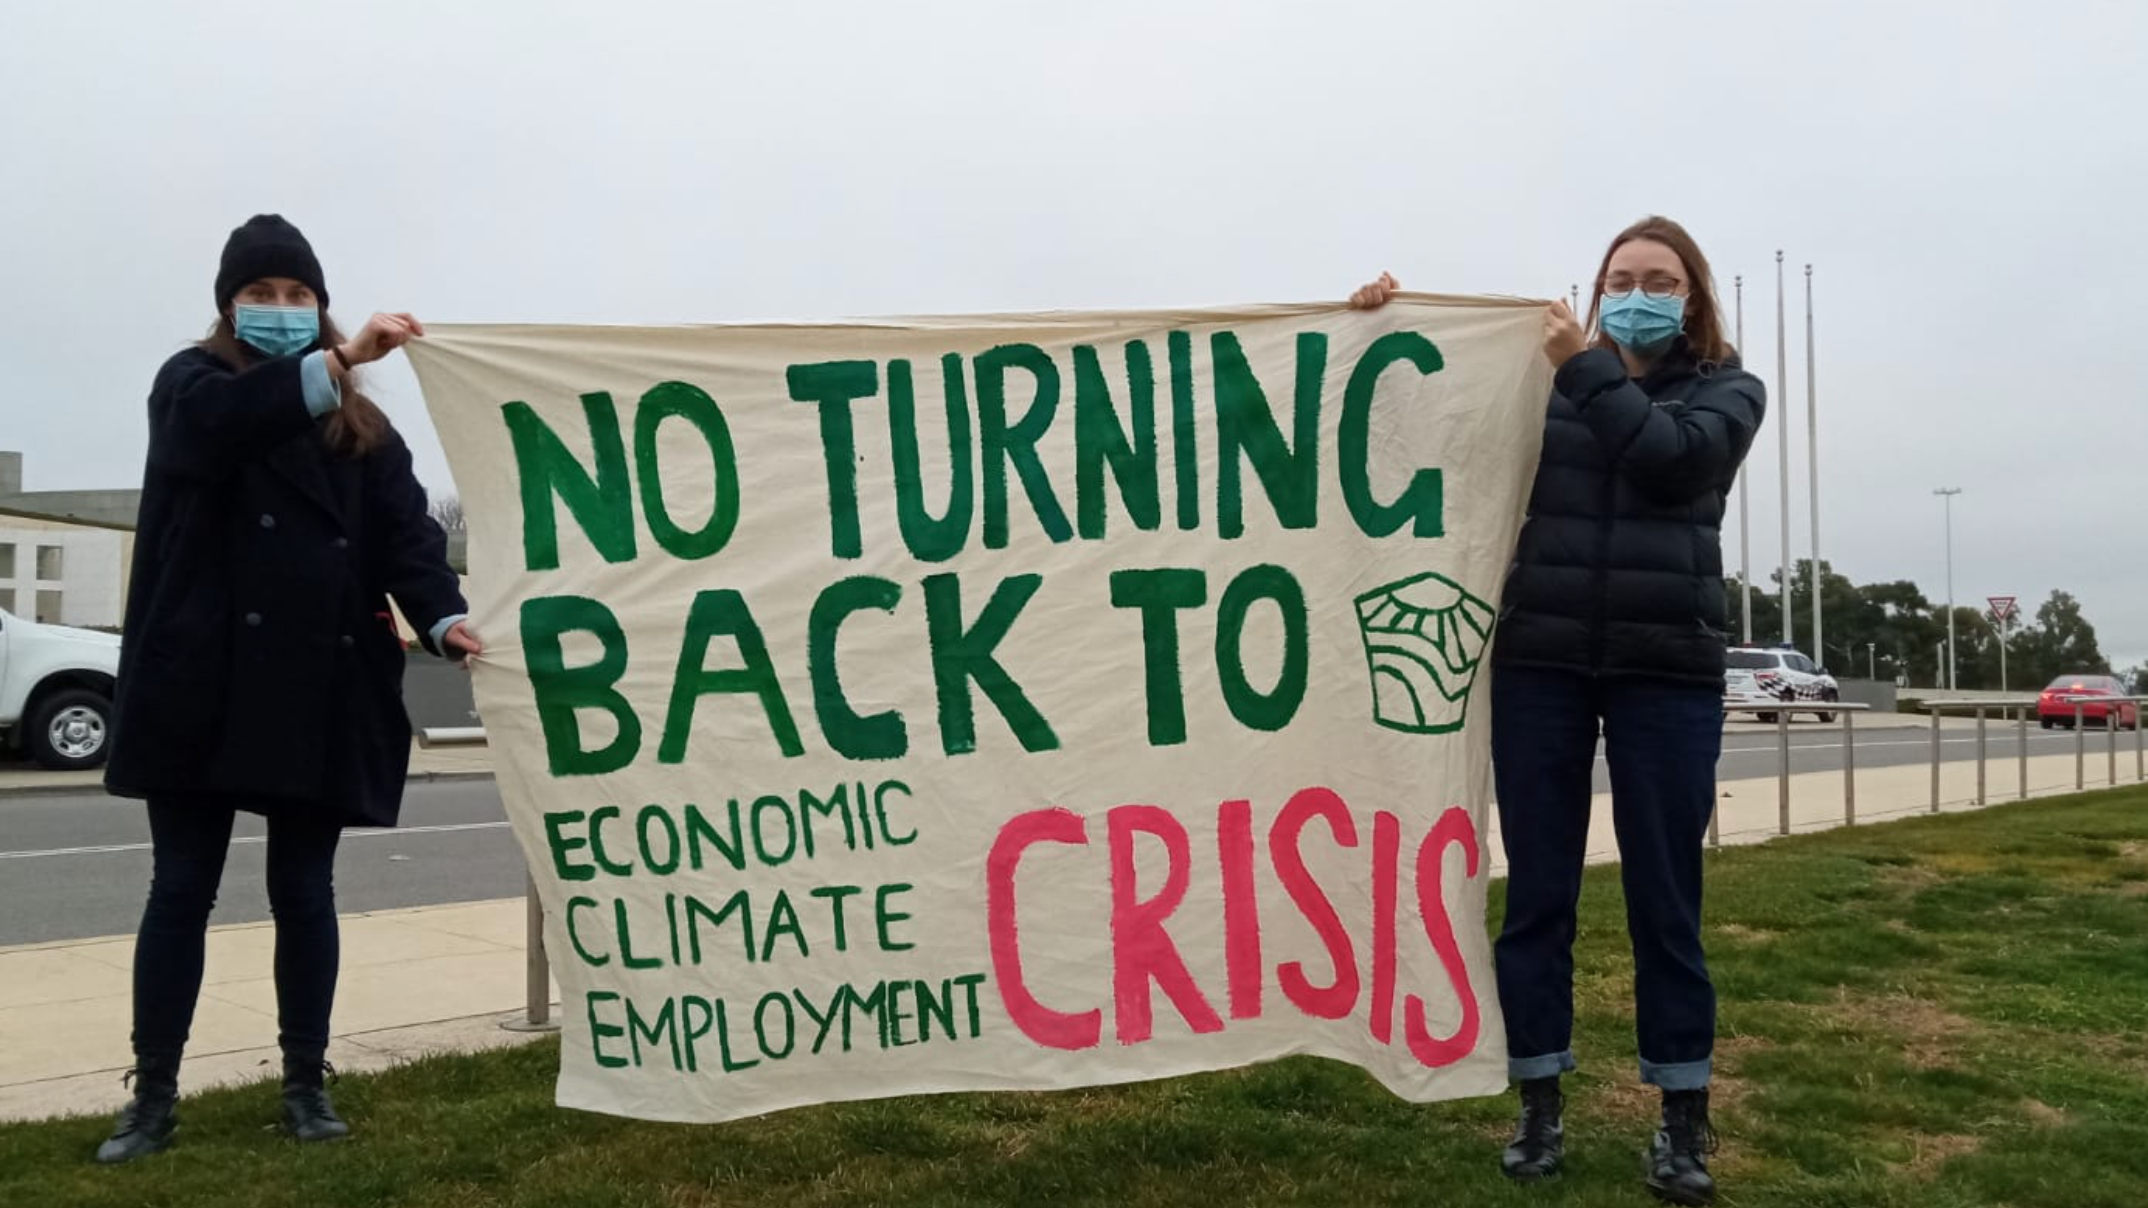 Two young people wearing dark toned warm winter clothes and covid protection face masks are holding a banner up on the side of a busy highway. The banner says “No Turning Back to economic, climate, employment CRISIS”.